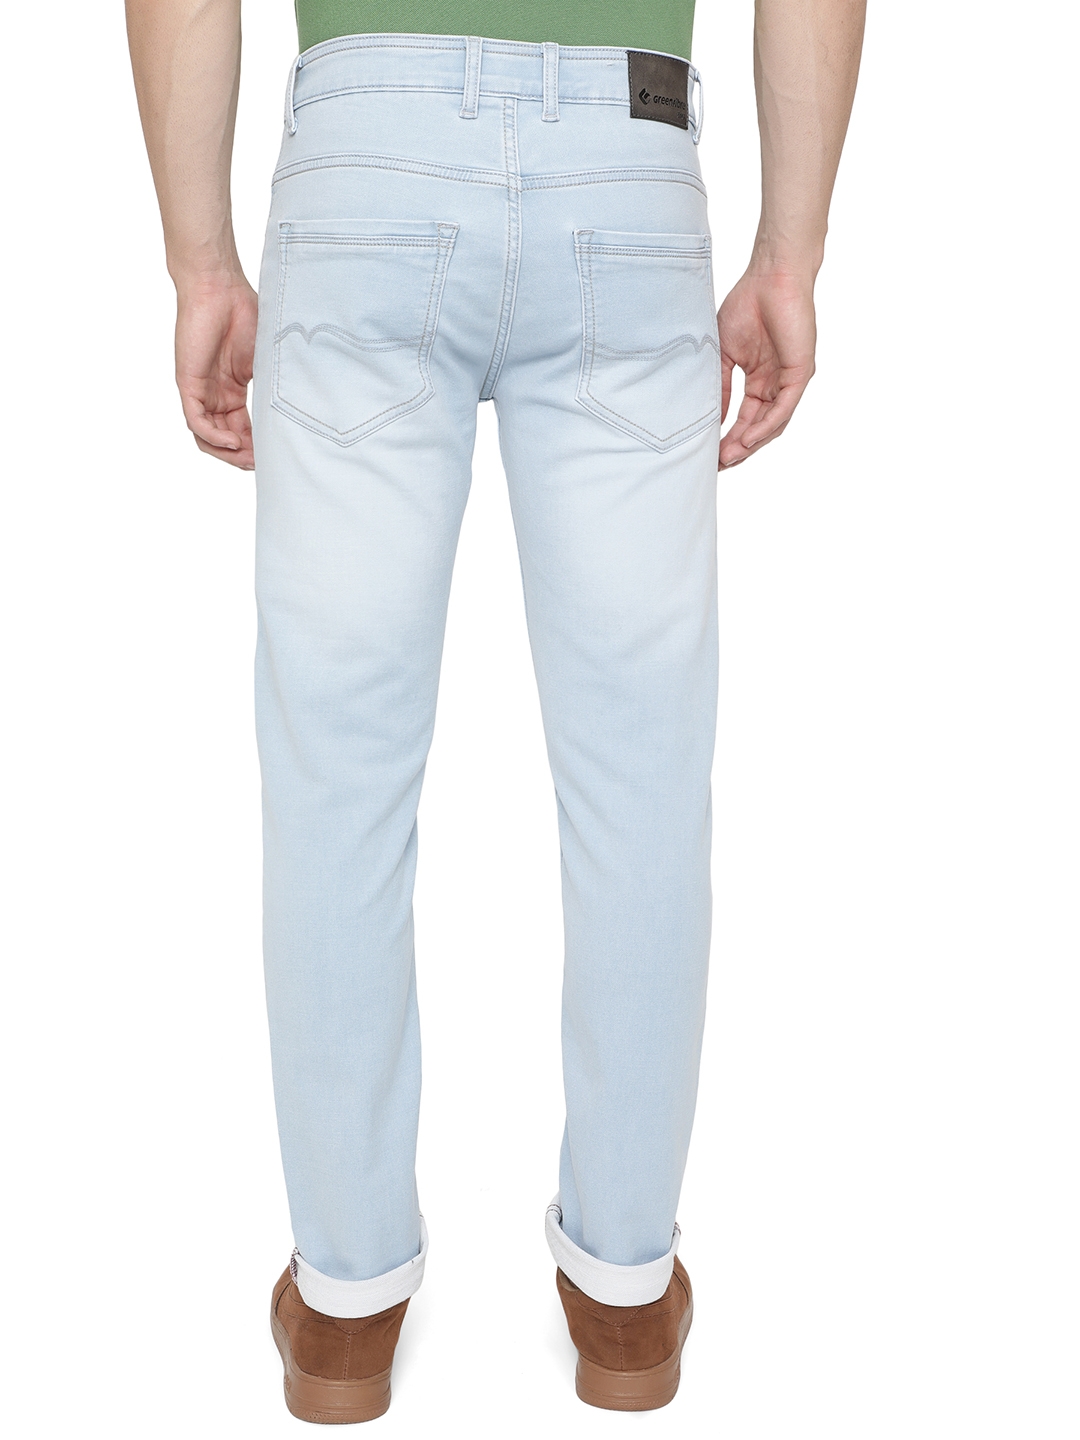 Greenfibre | Ice Blue Solid Narrow Fit Jeans | Greenfibre 2